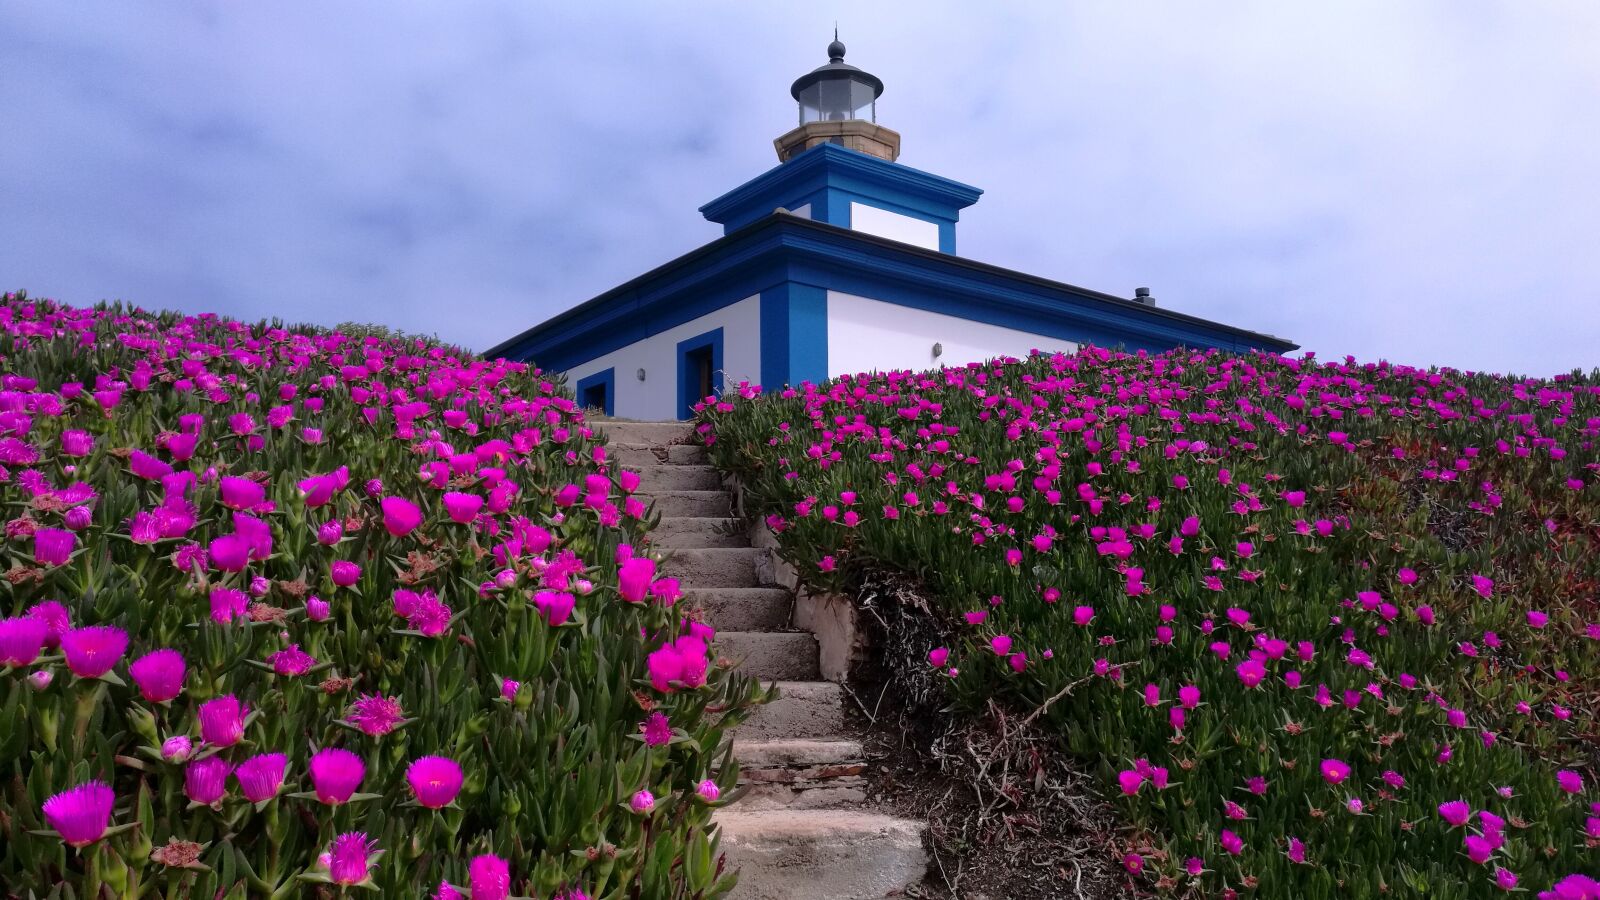 HUAWEI Mate 8 sample photo. Landscape, lighthouse, flowers photography